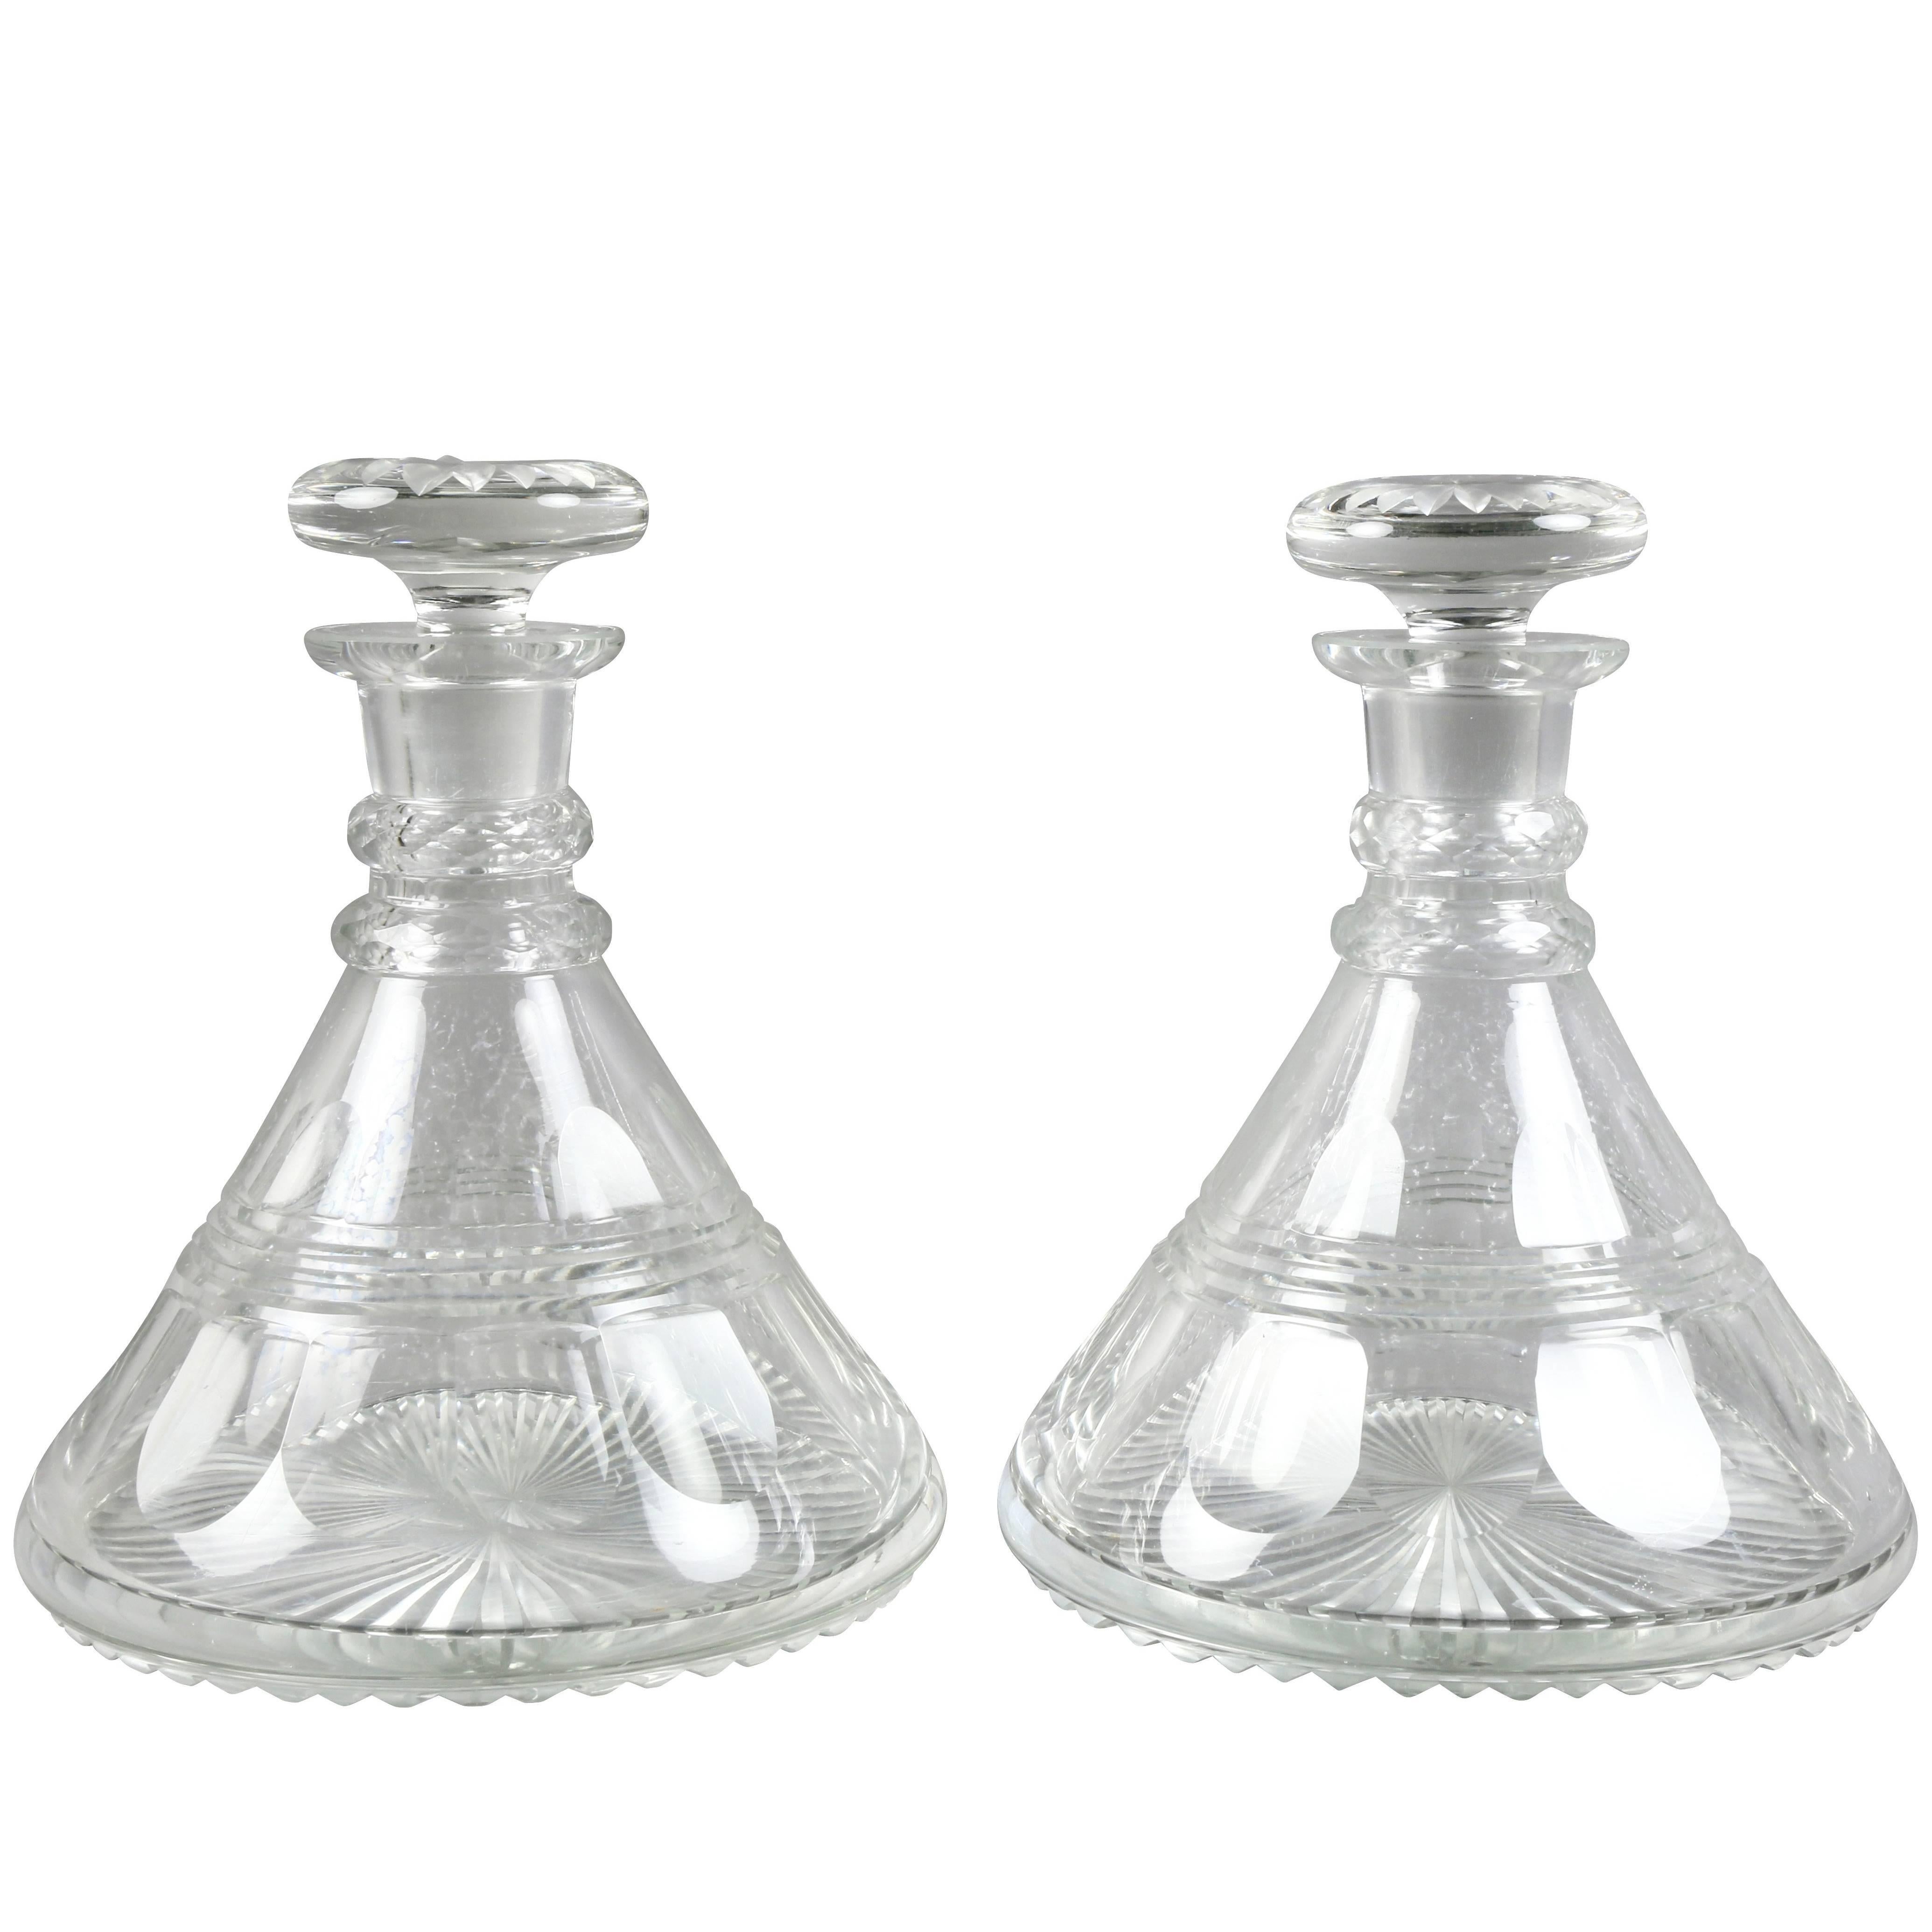 Pair of Cut Glass Ships Decanters